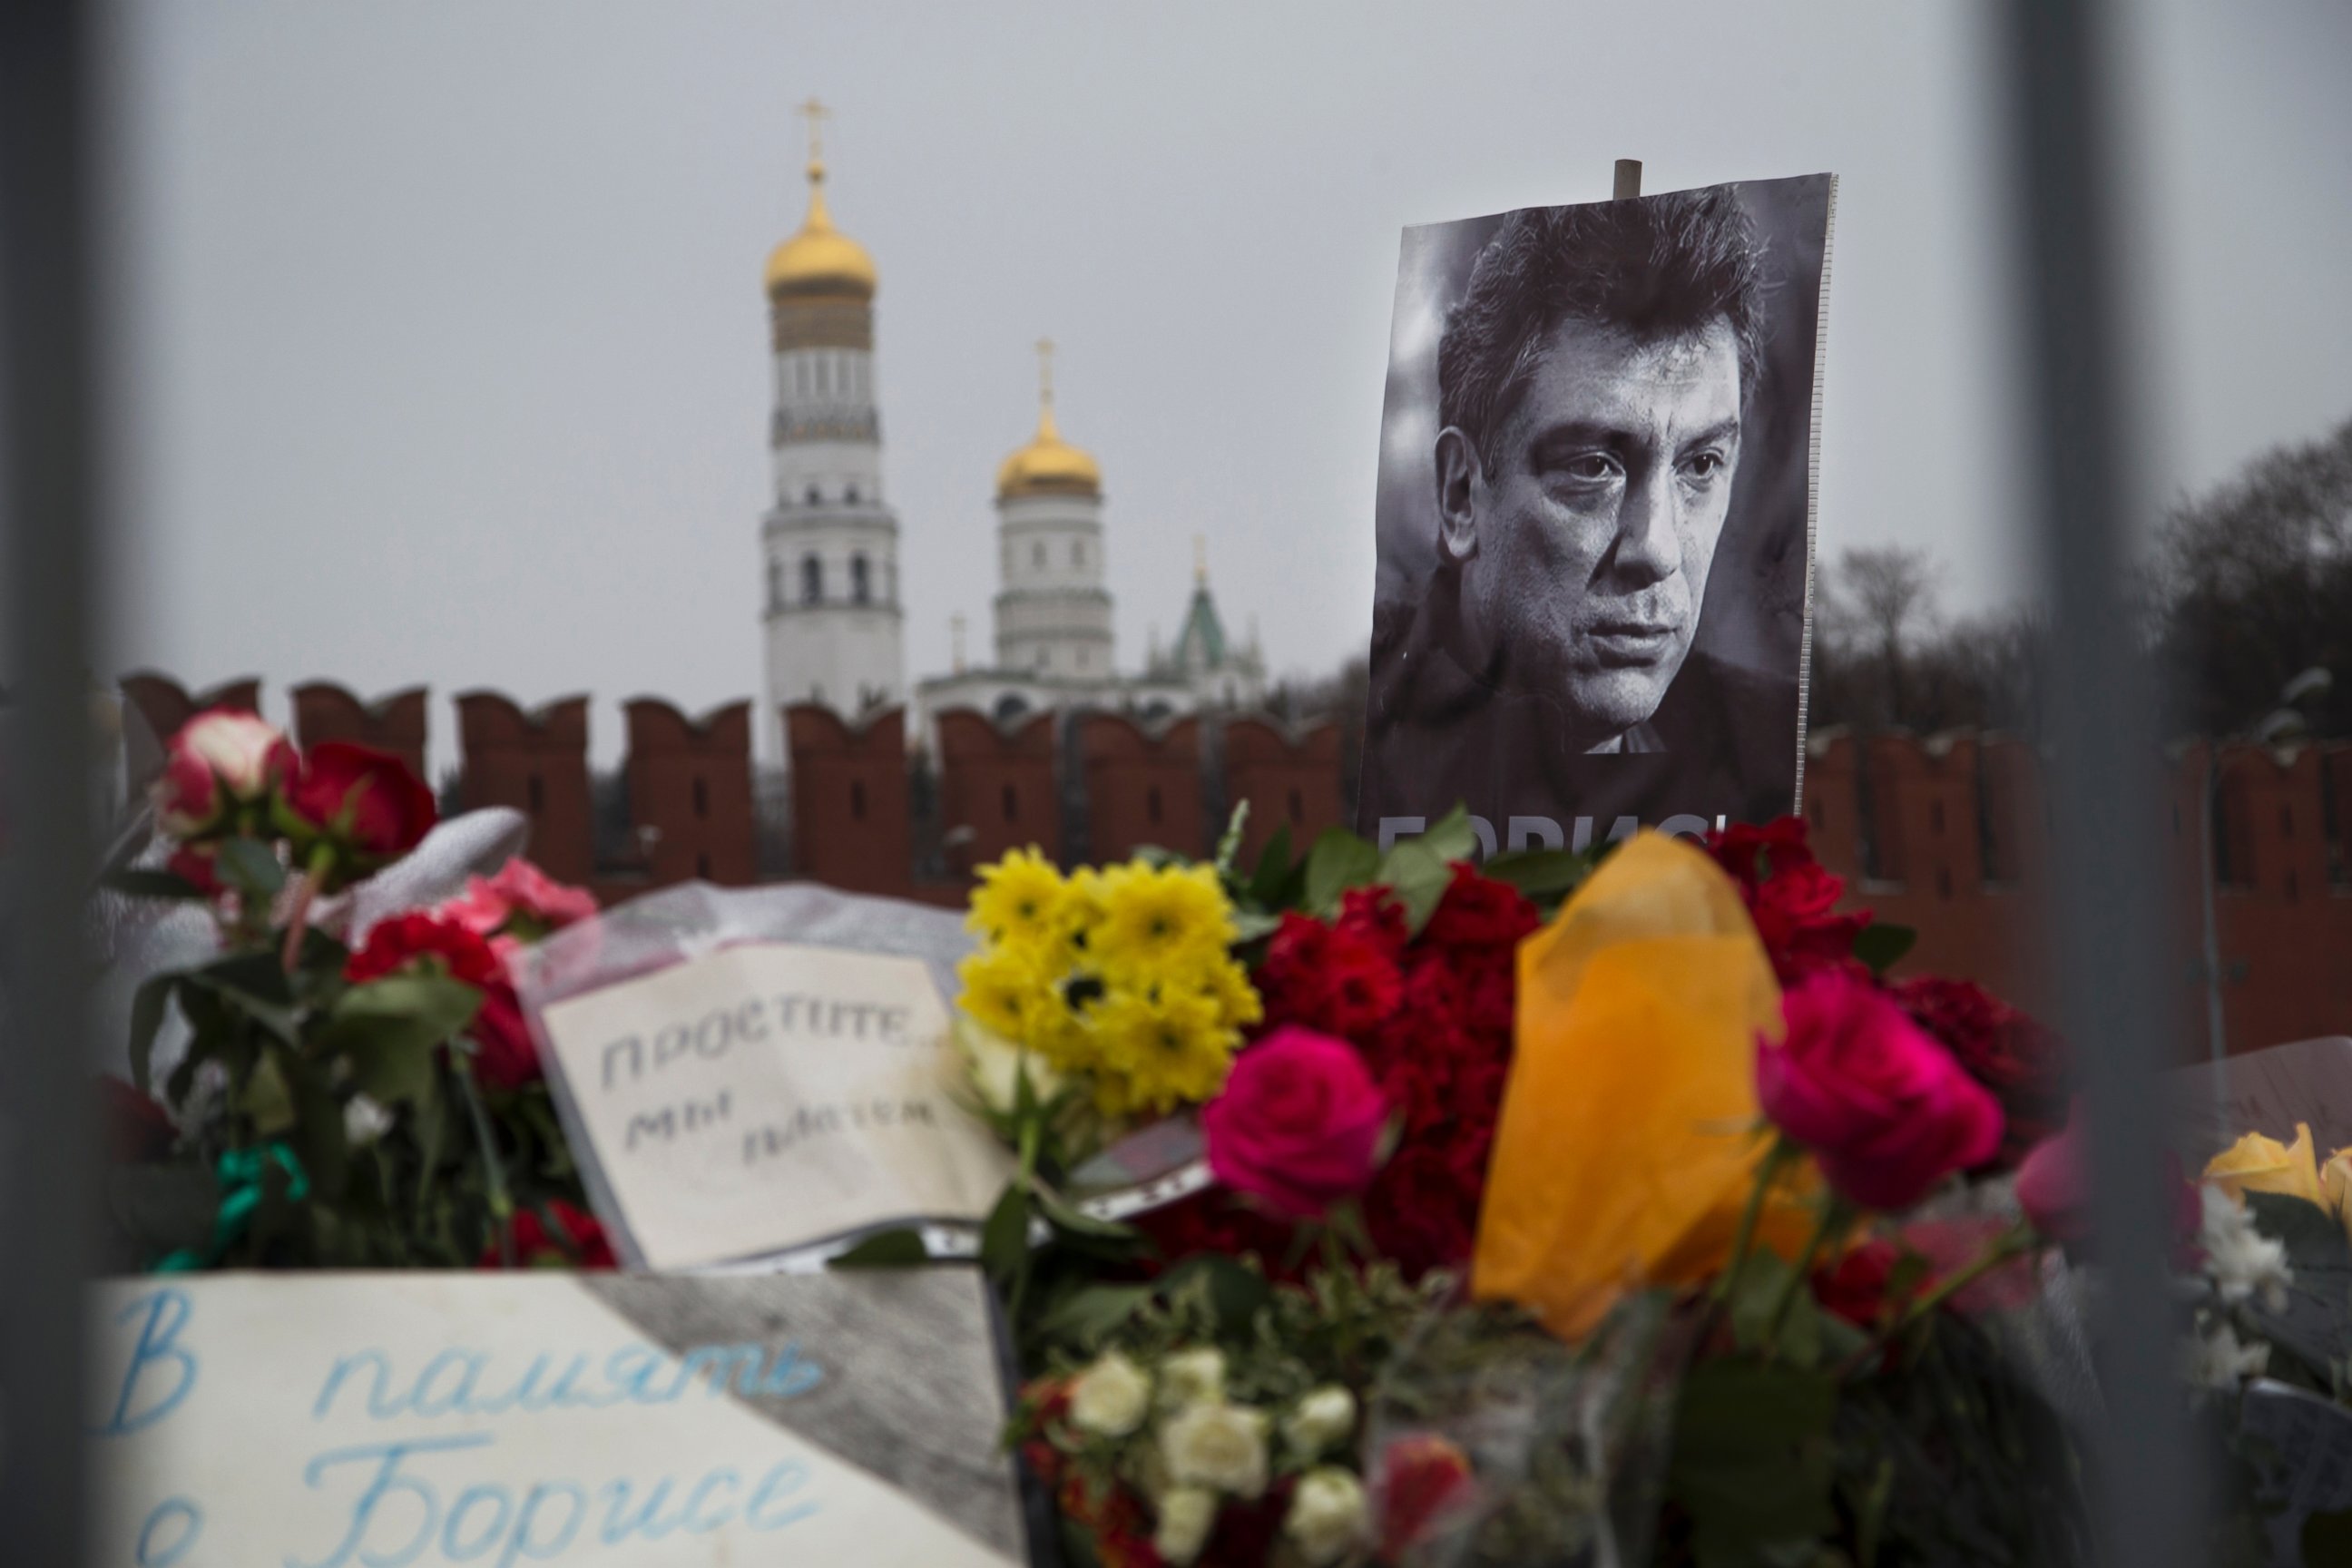 PHOTO: Flowers and a condolence message that reads "In memory of Boris" are placed with a portrait of Boris Nemtsov, at the site where Nemtsov was gunned down near the Kremlin, in Moscow, Russia, Monday, March 2, 2015. 